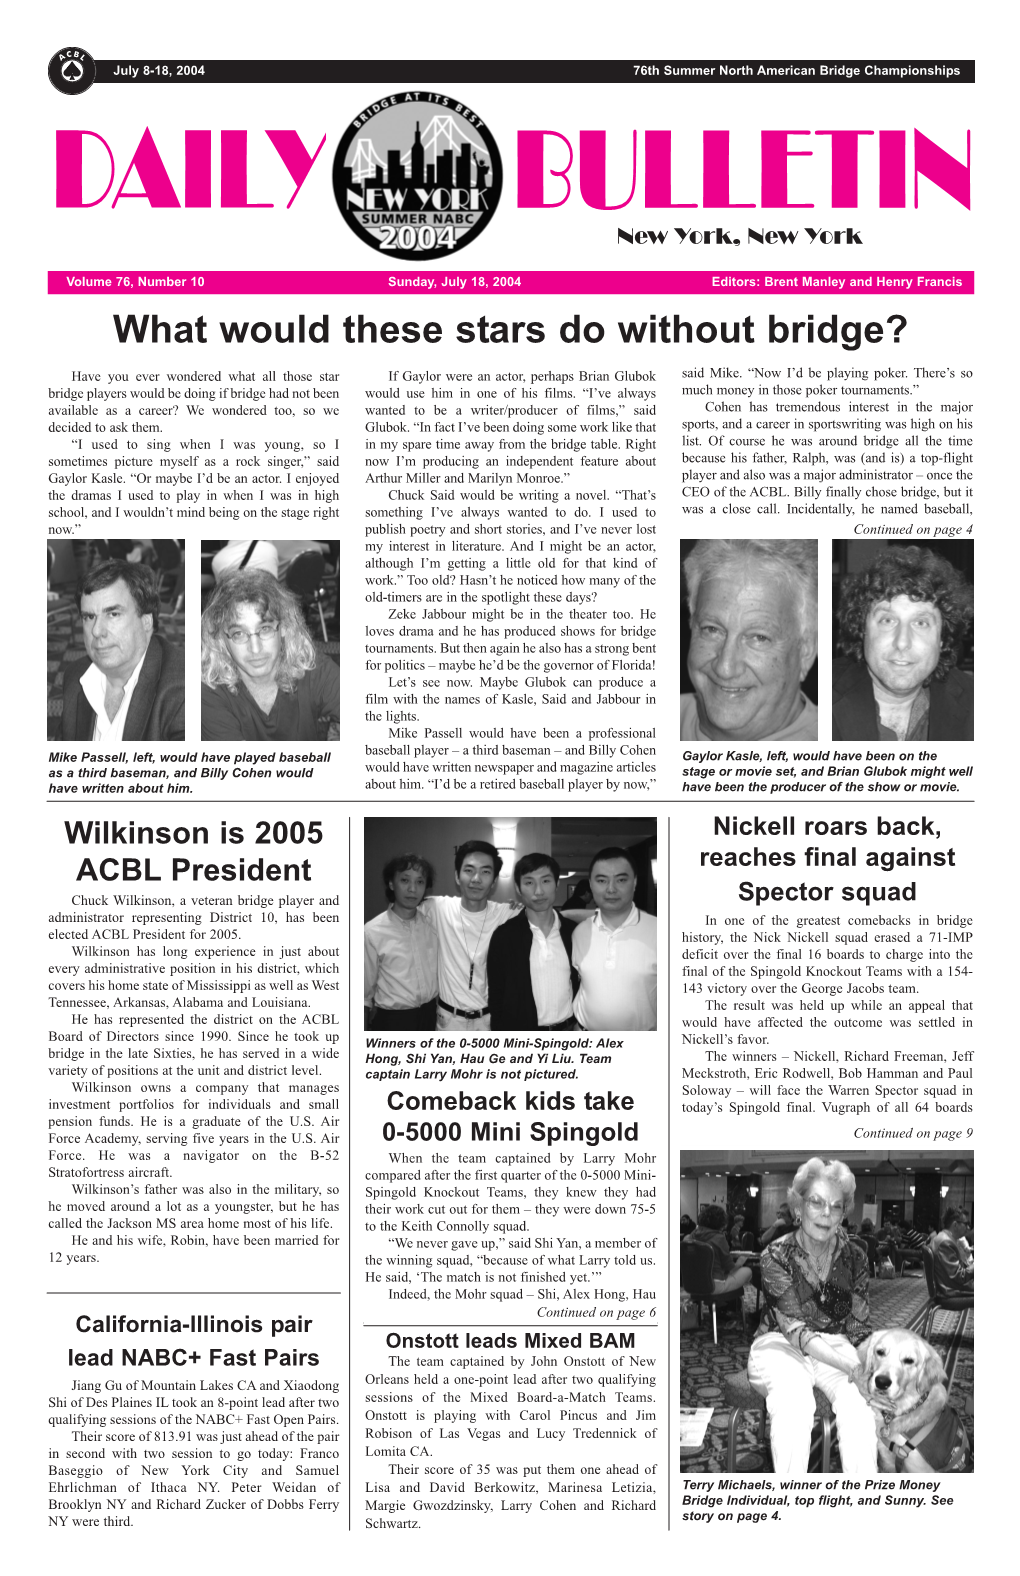 What Would These Stars Do Without Bridge?